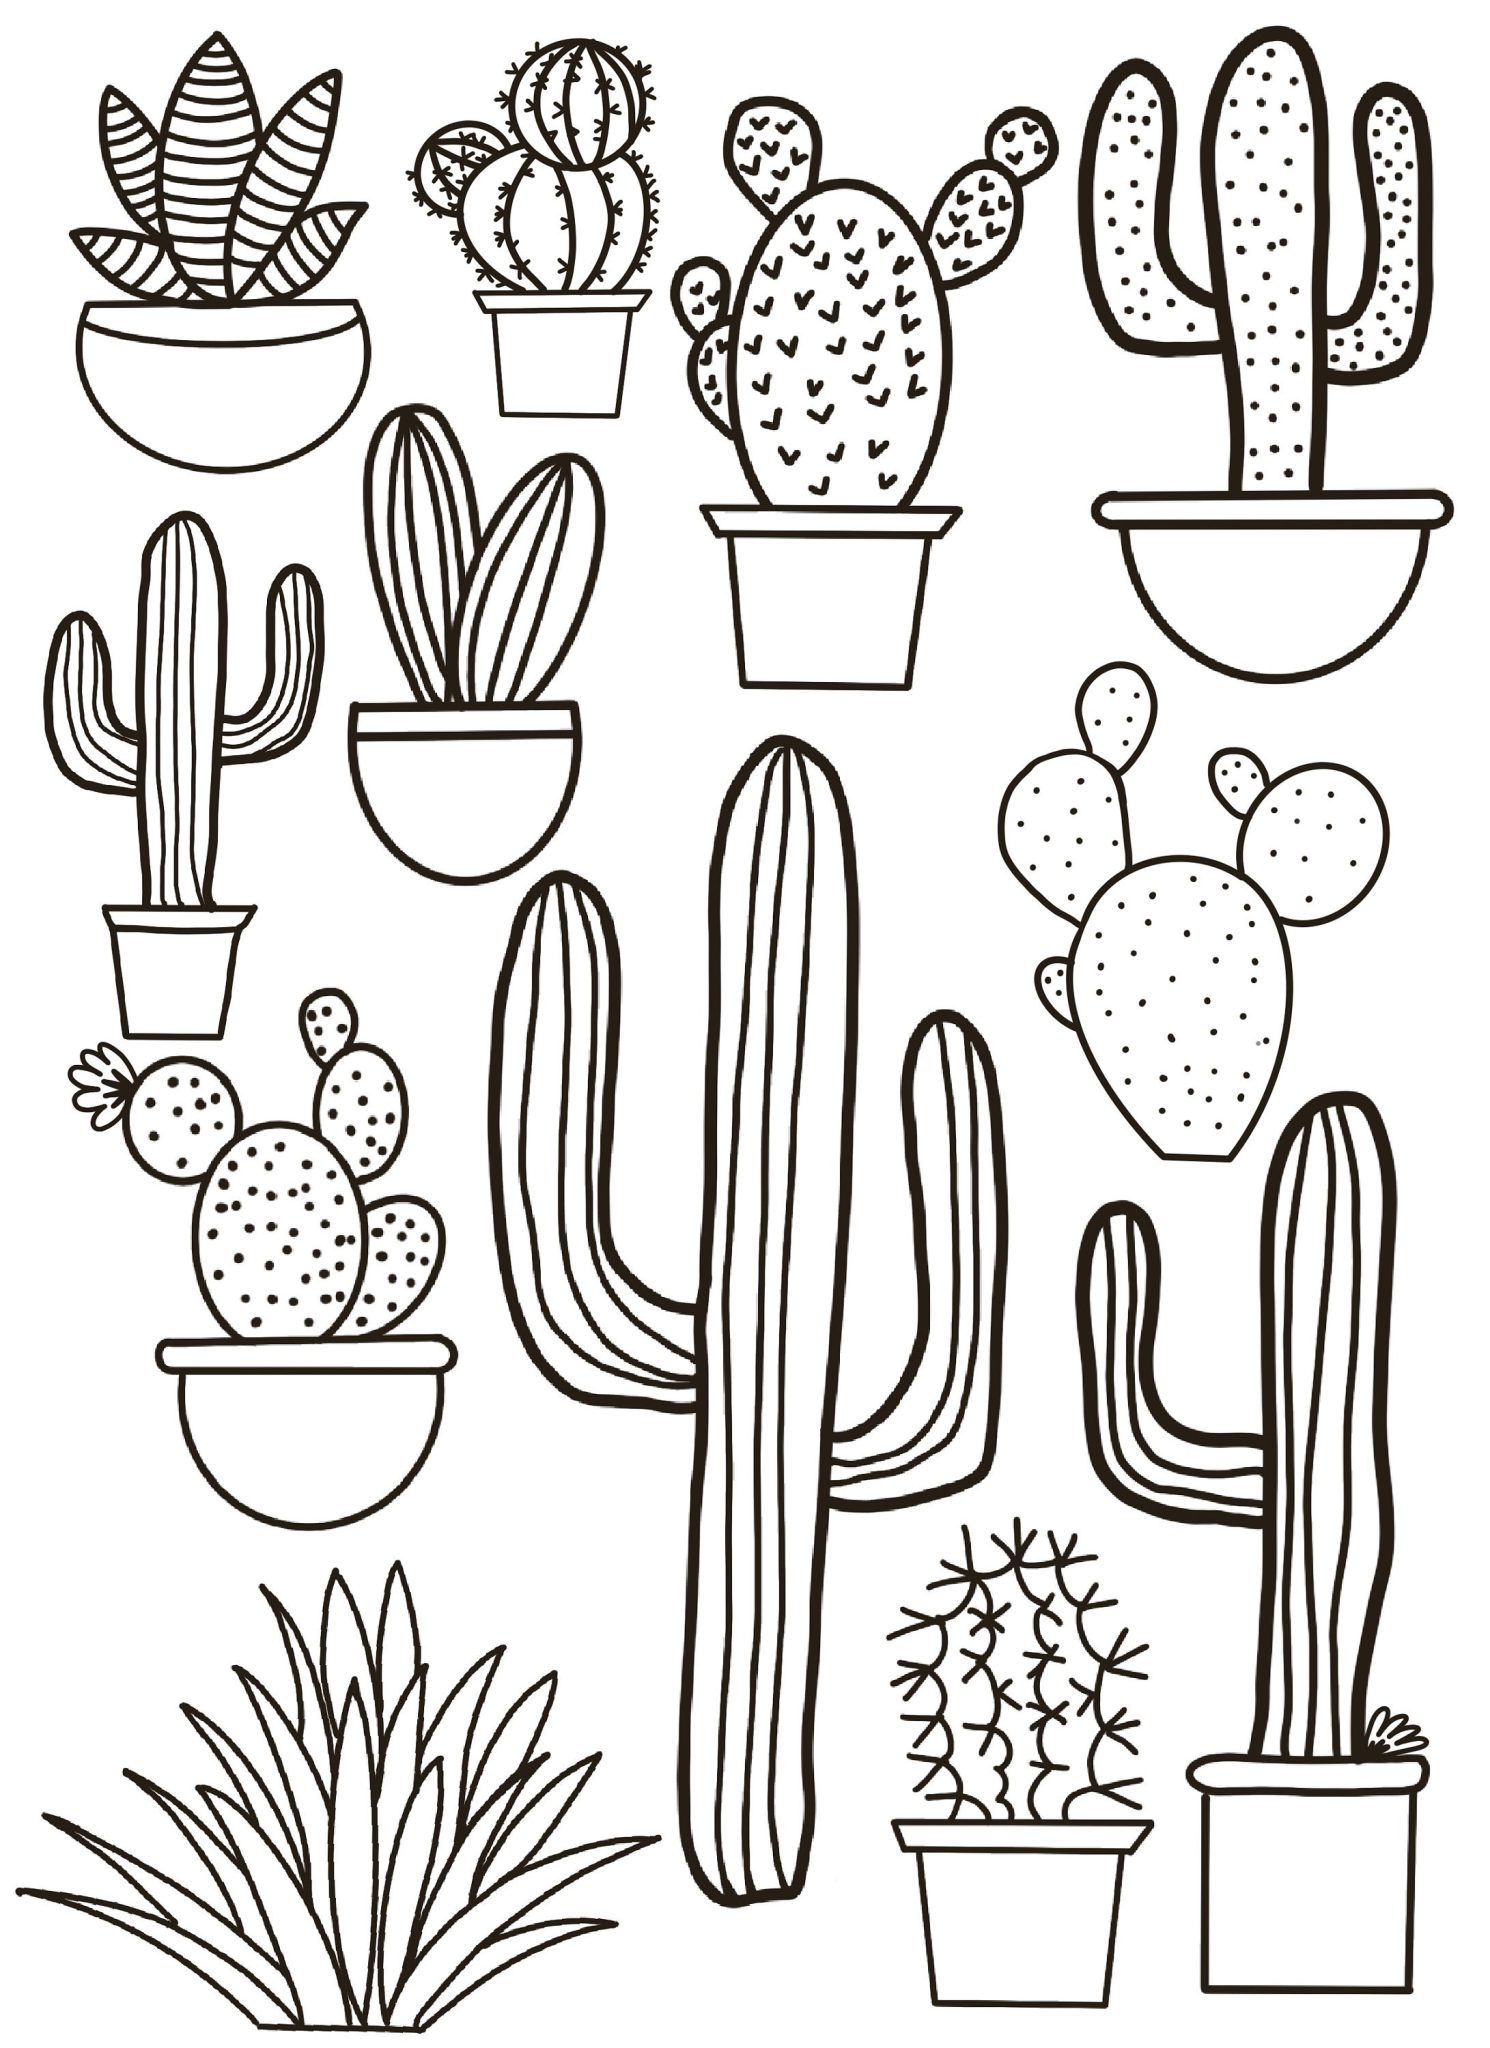 Explore the Beauty of Nature with Free Cactus Coloring Pages